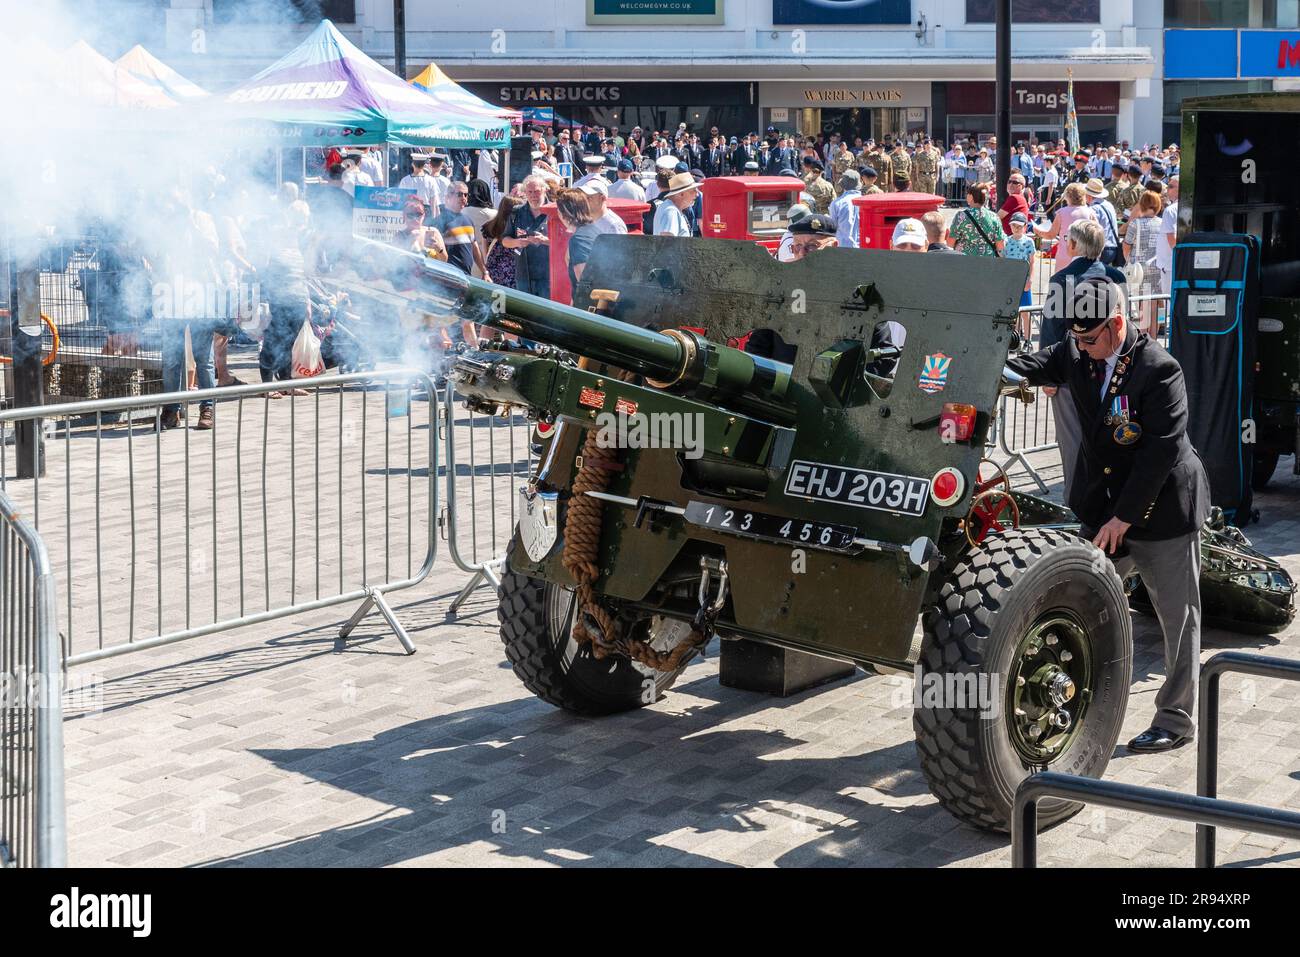 British QF 25 pounder gun salute at an Armed Forces Day, AFD, commemorative military remembrance event in High Street, Southend on Sea, Essex, UK Stock Photo